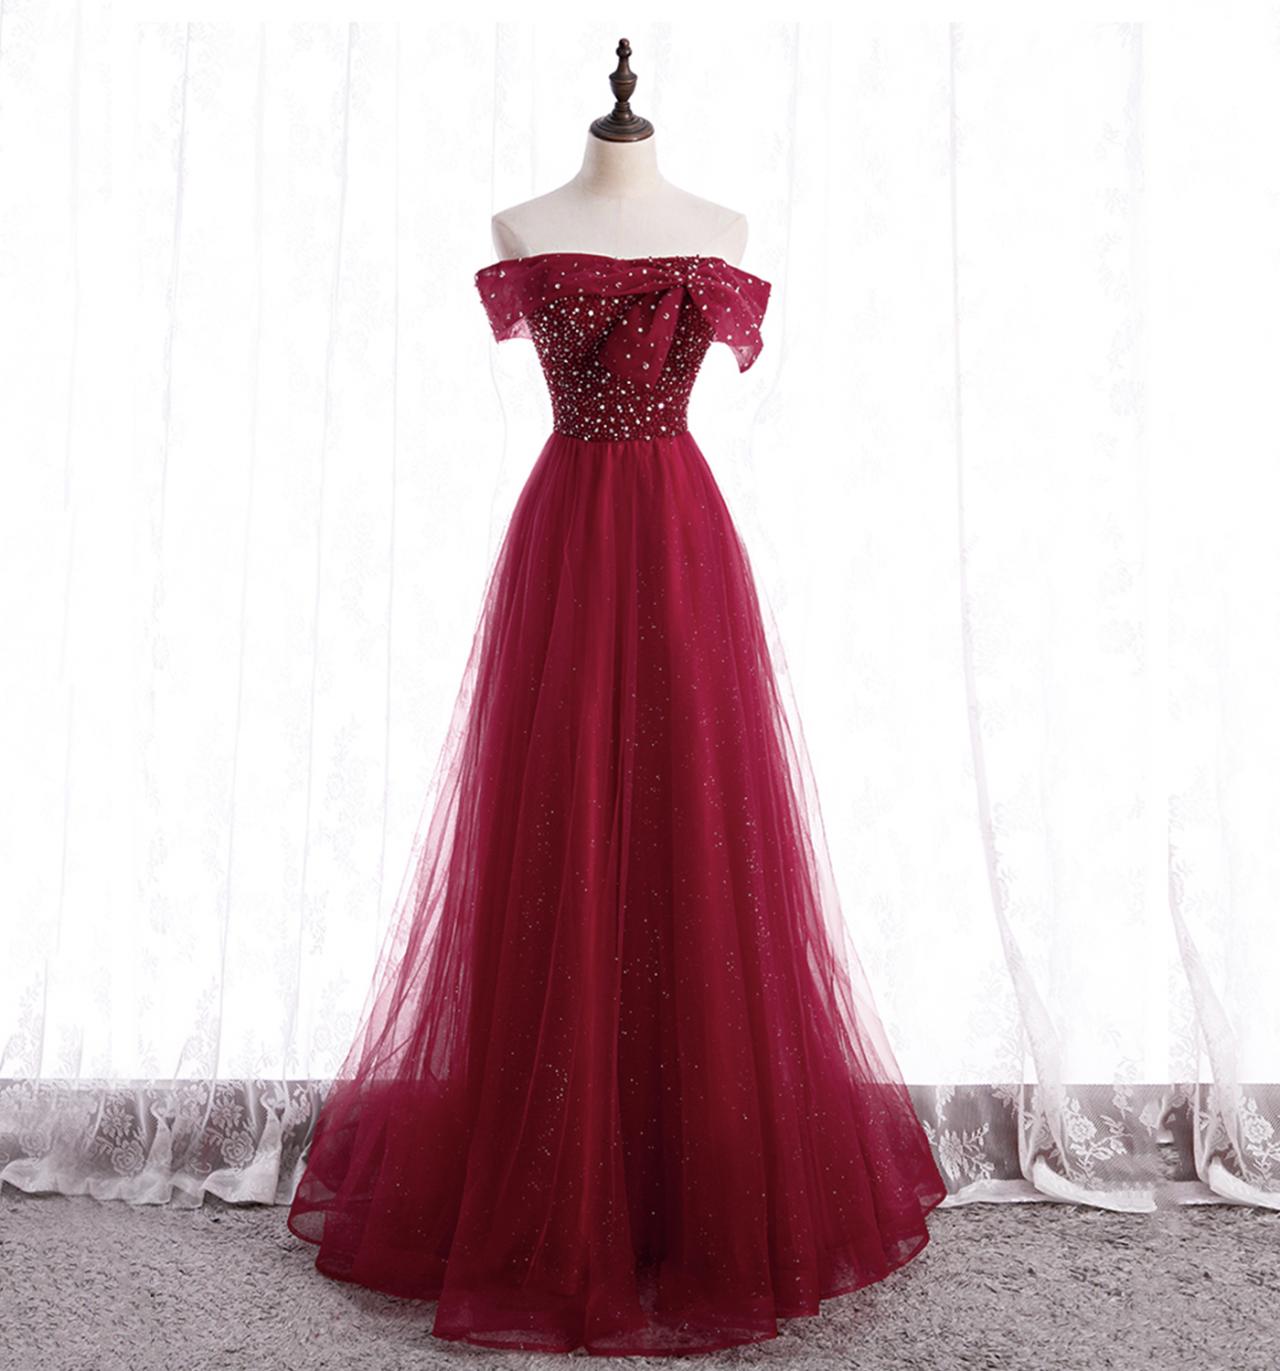 Elegant Tulle Beads A-Line Sweetheart Formal Prom Dress, Beautiful Long Prom Dress, Banquet Party Dress